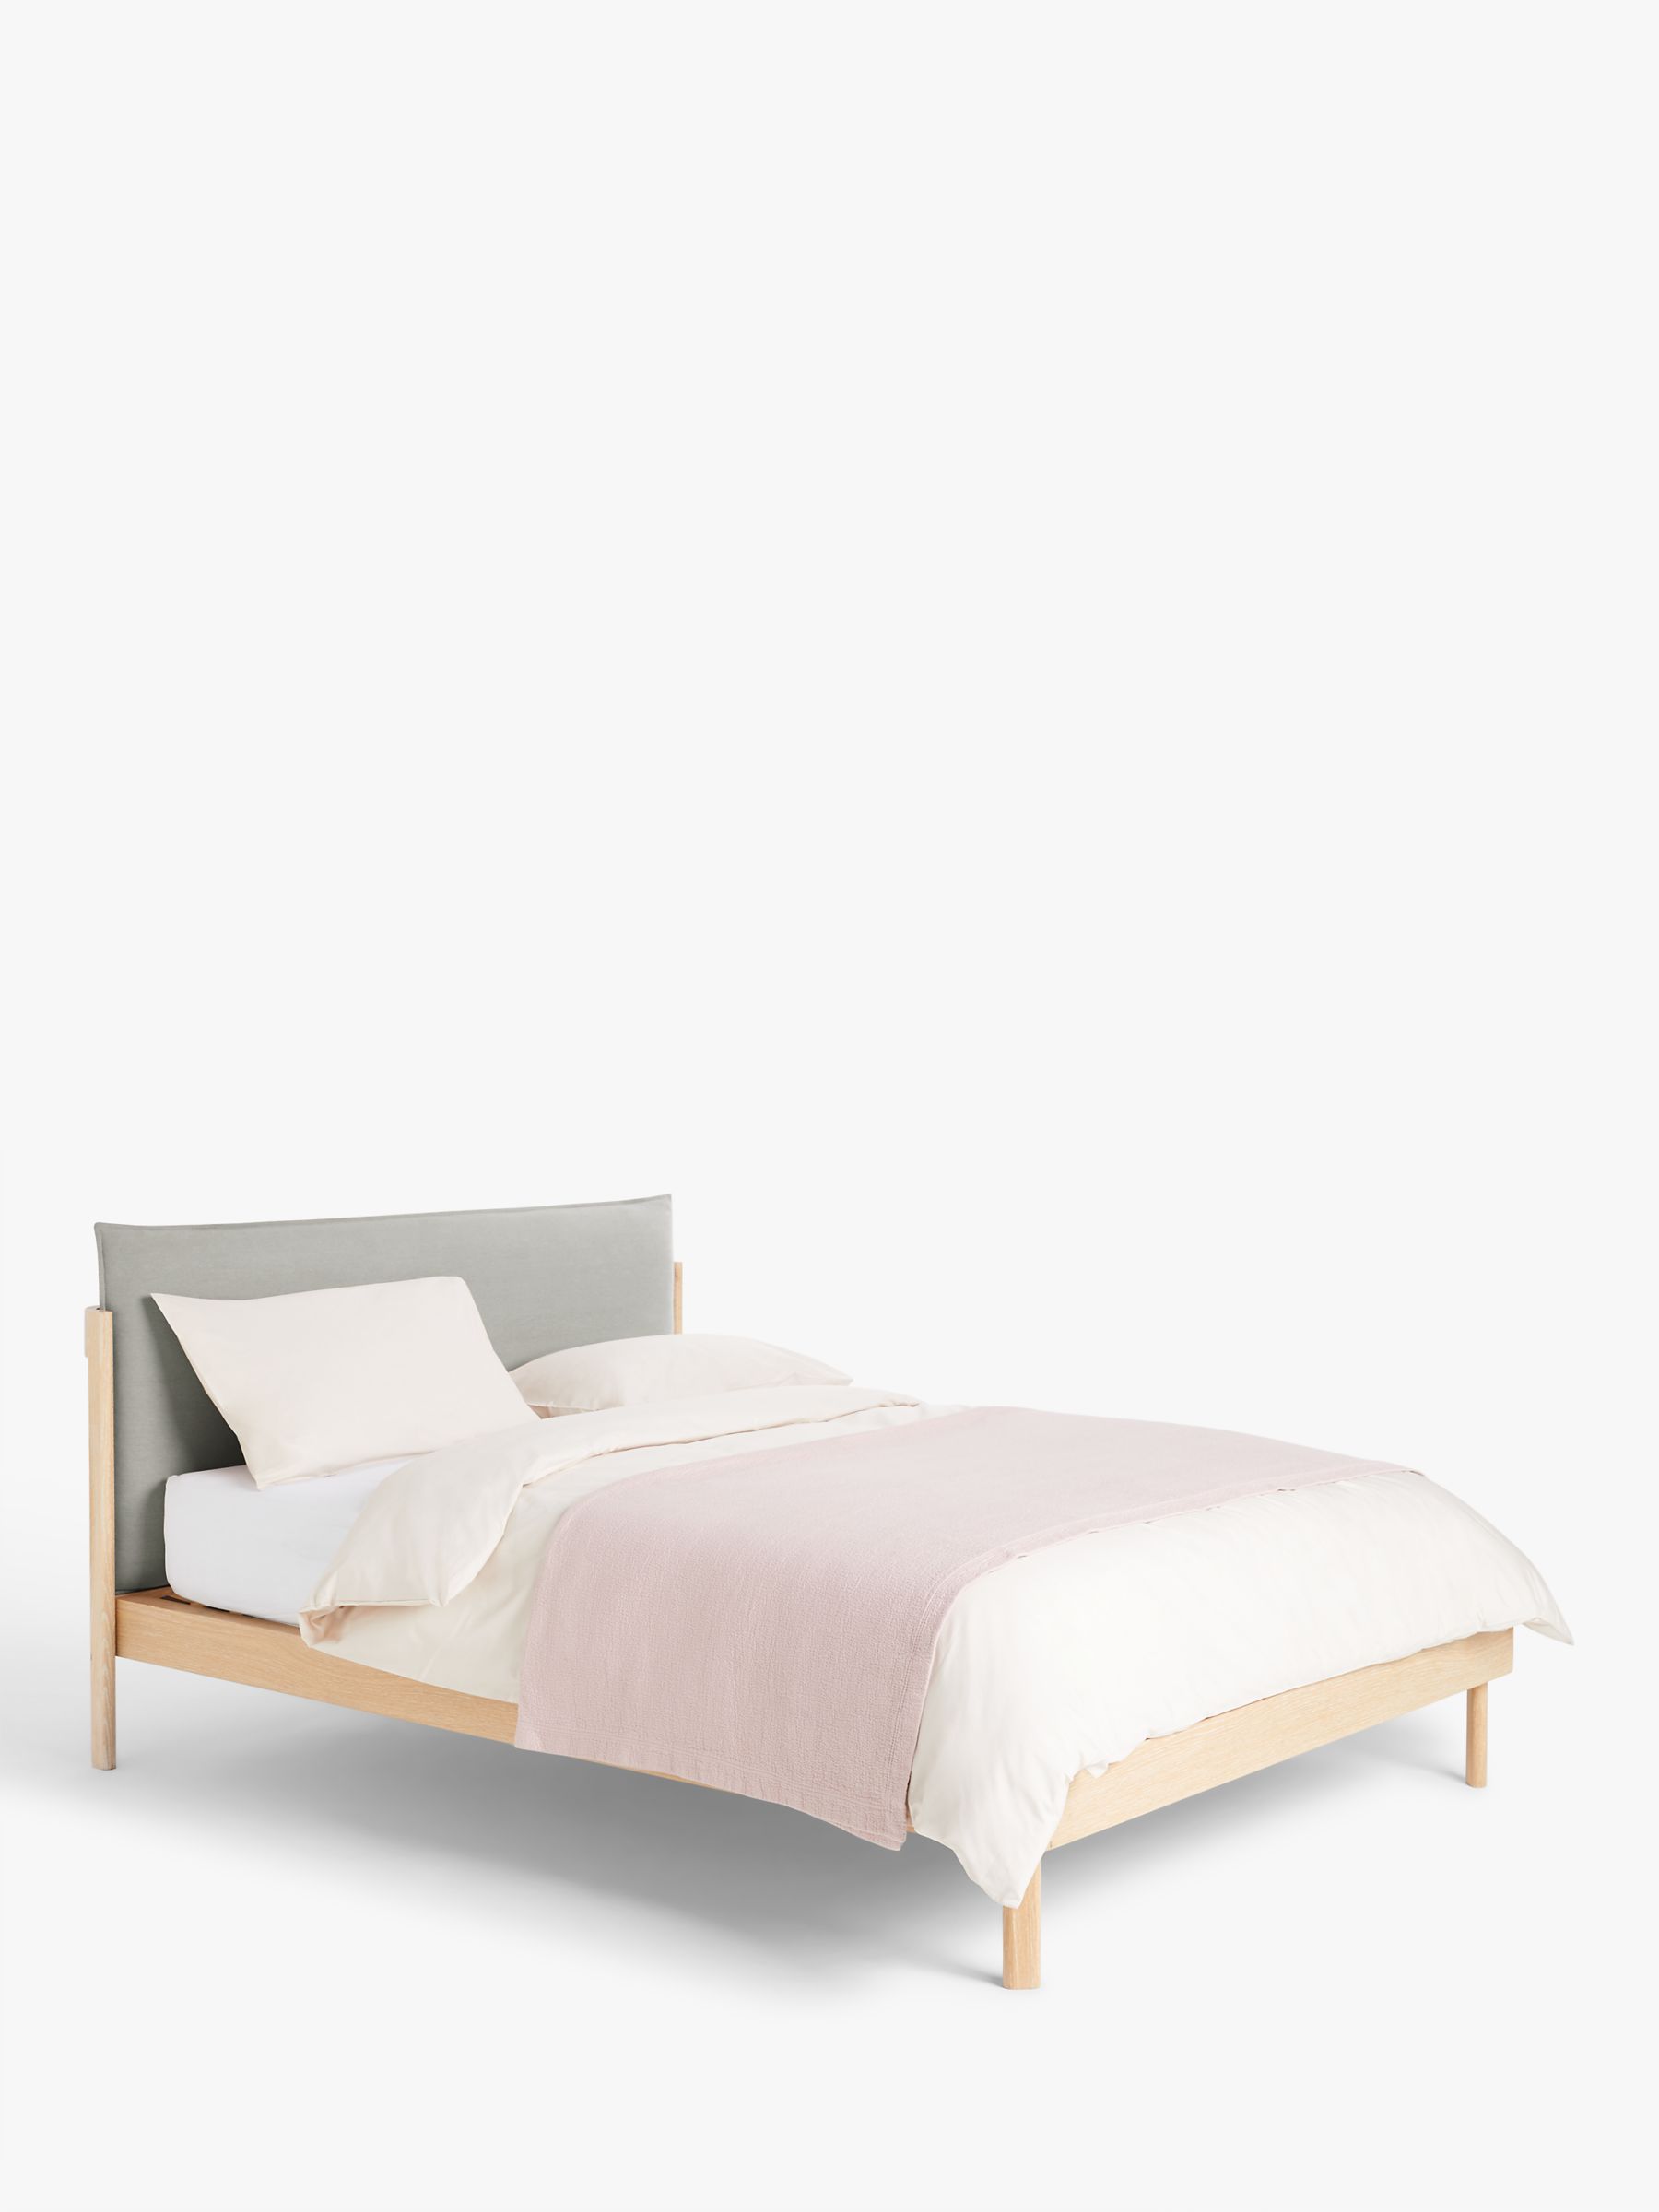 Photo of John lewis pillow bed frame double